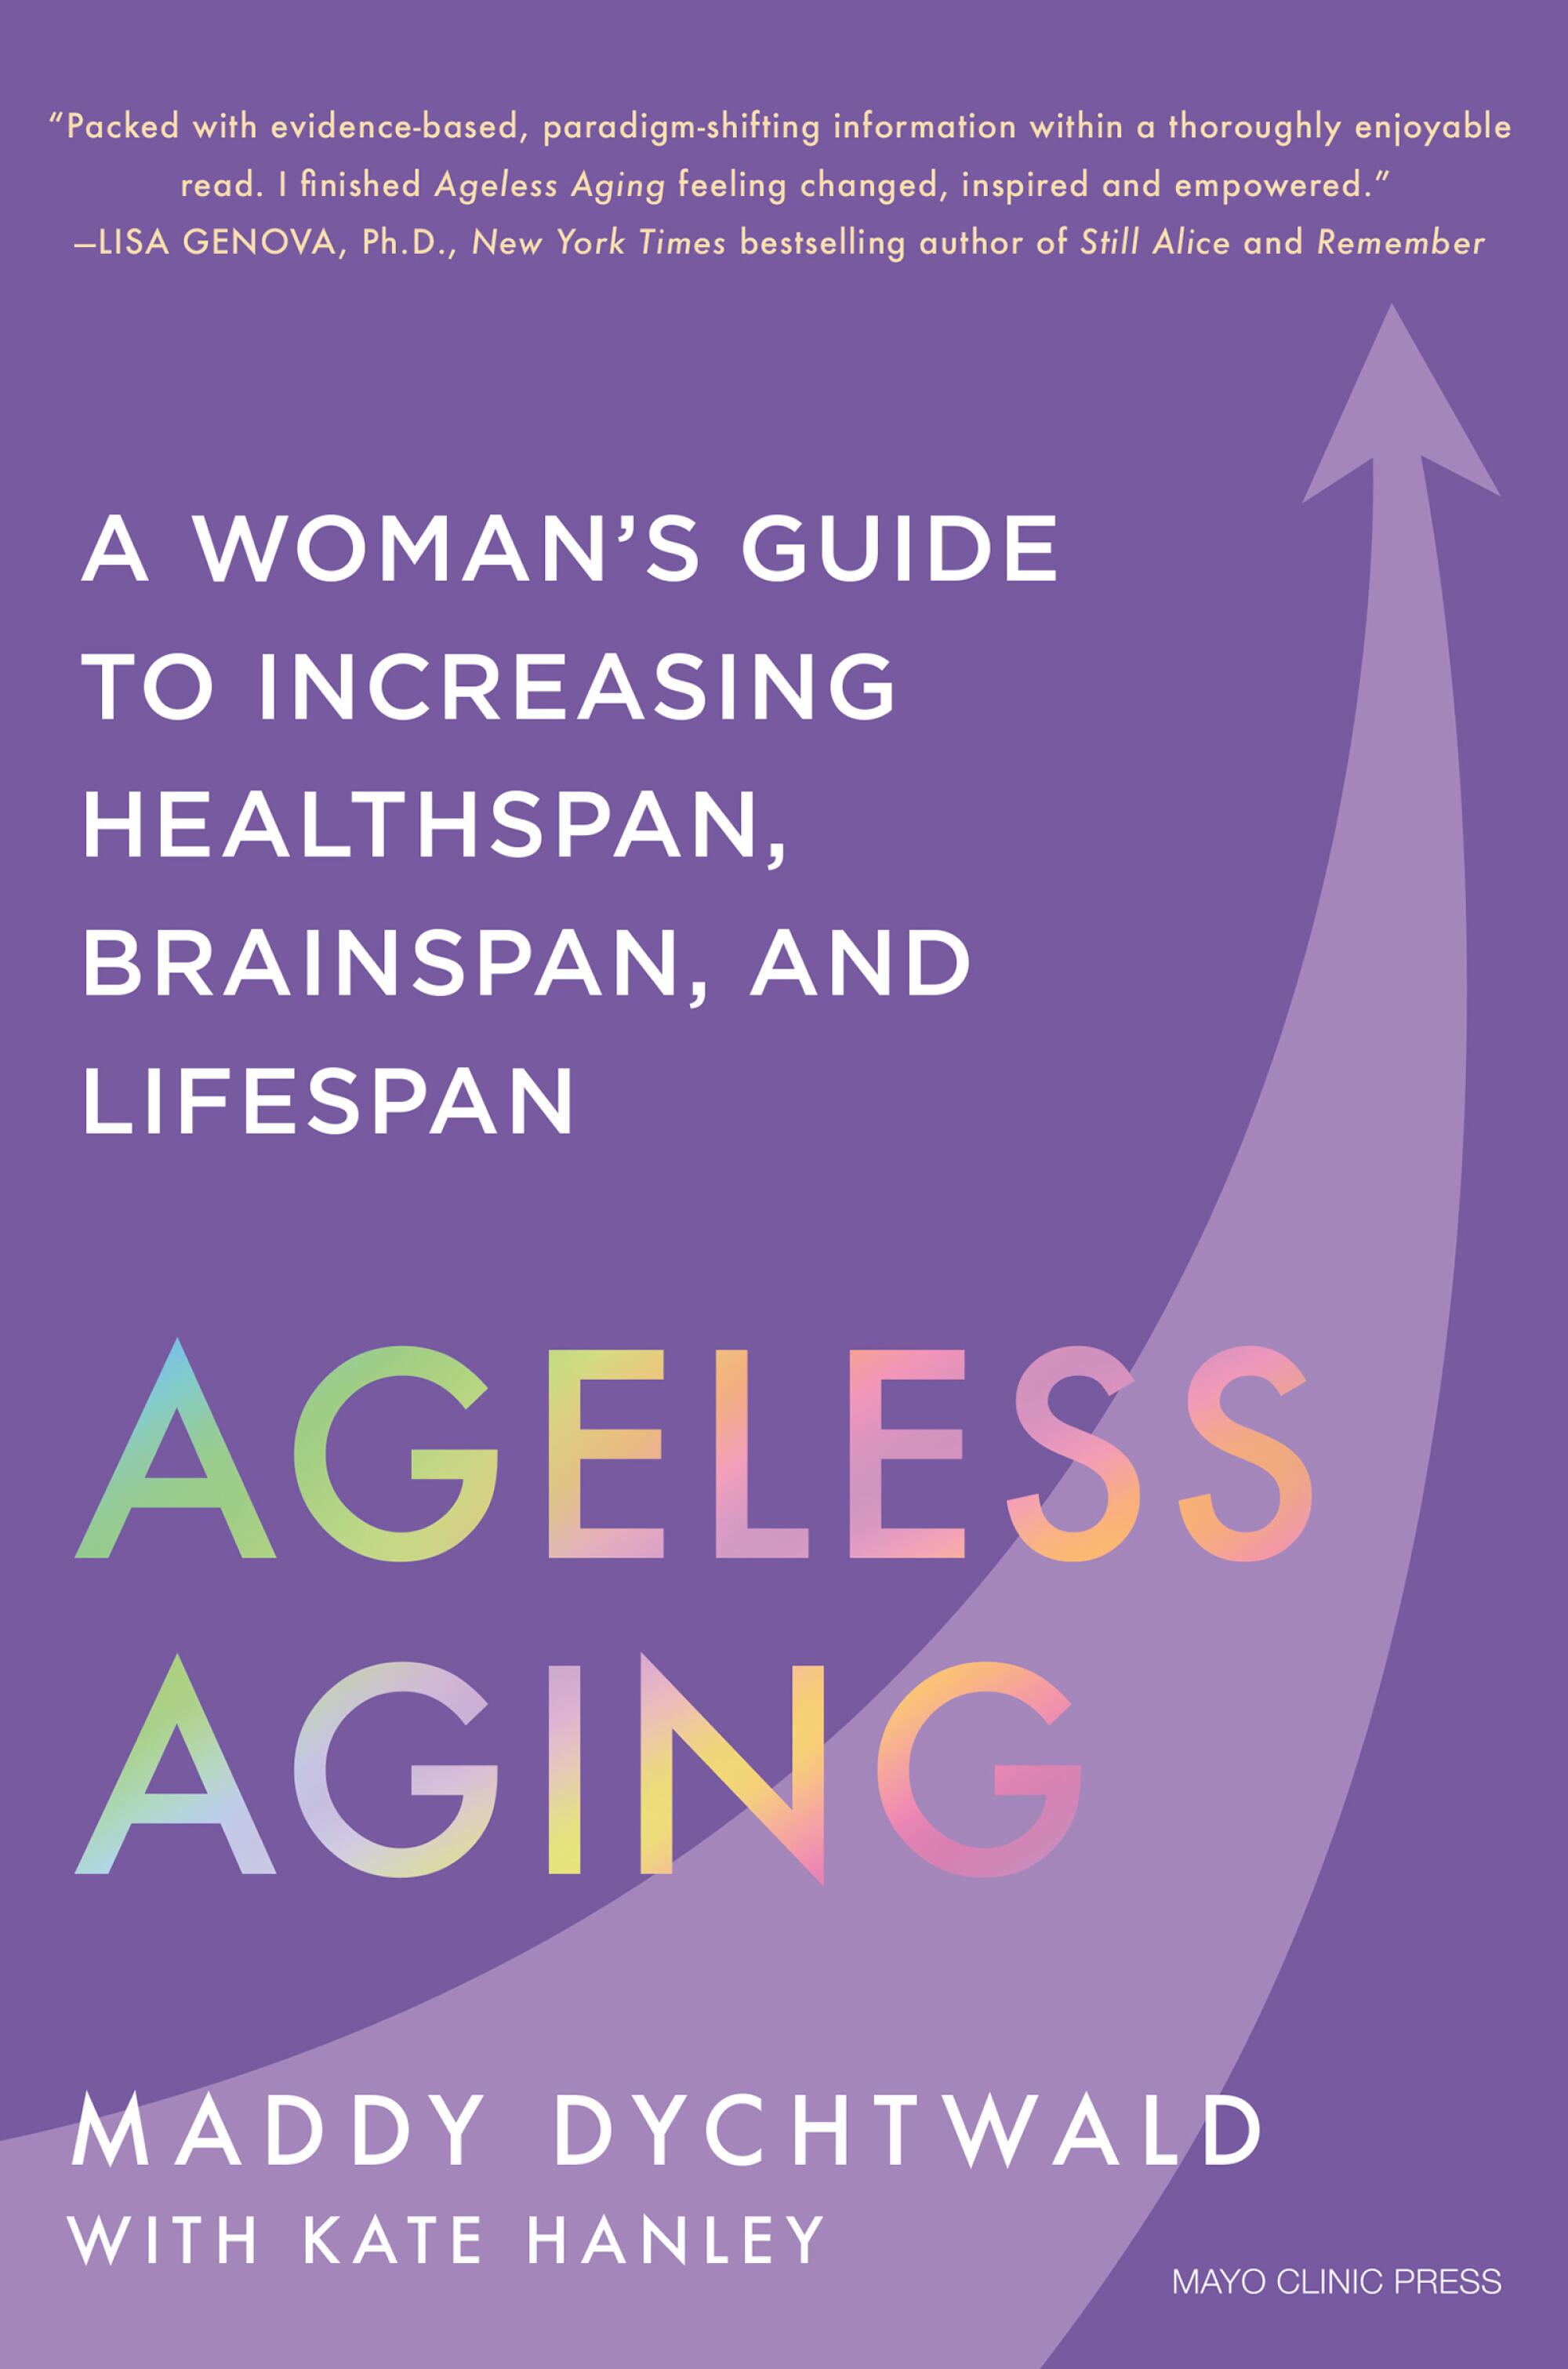 The cover of Maddy Dychtwald's book "Ageless Aging"